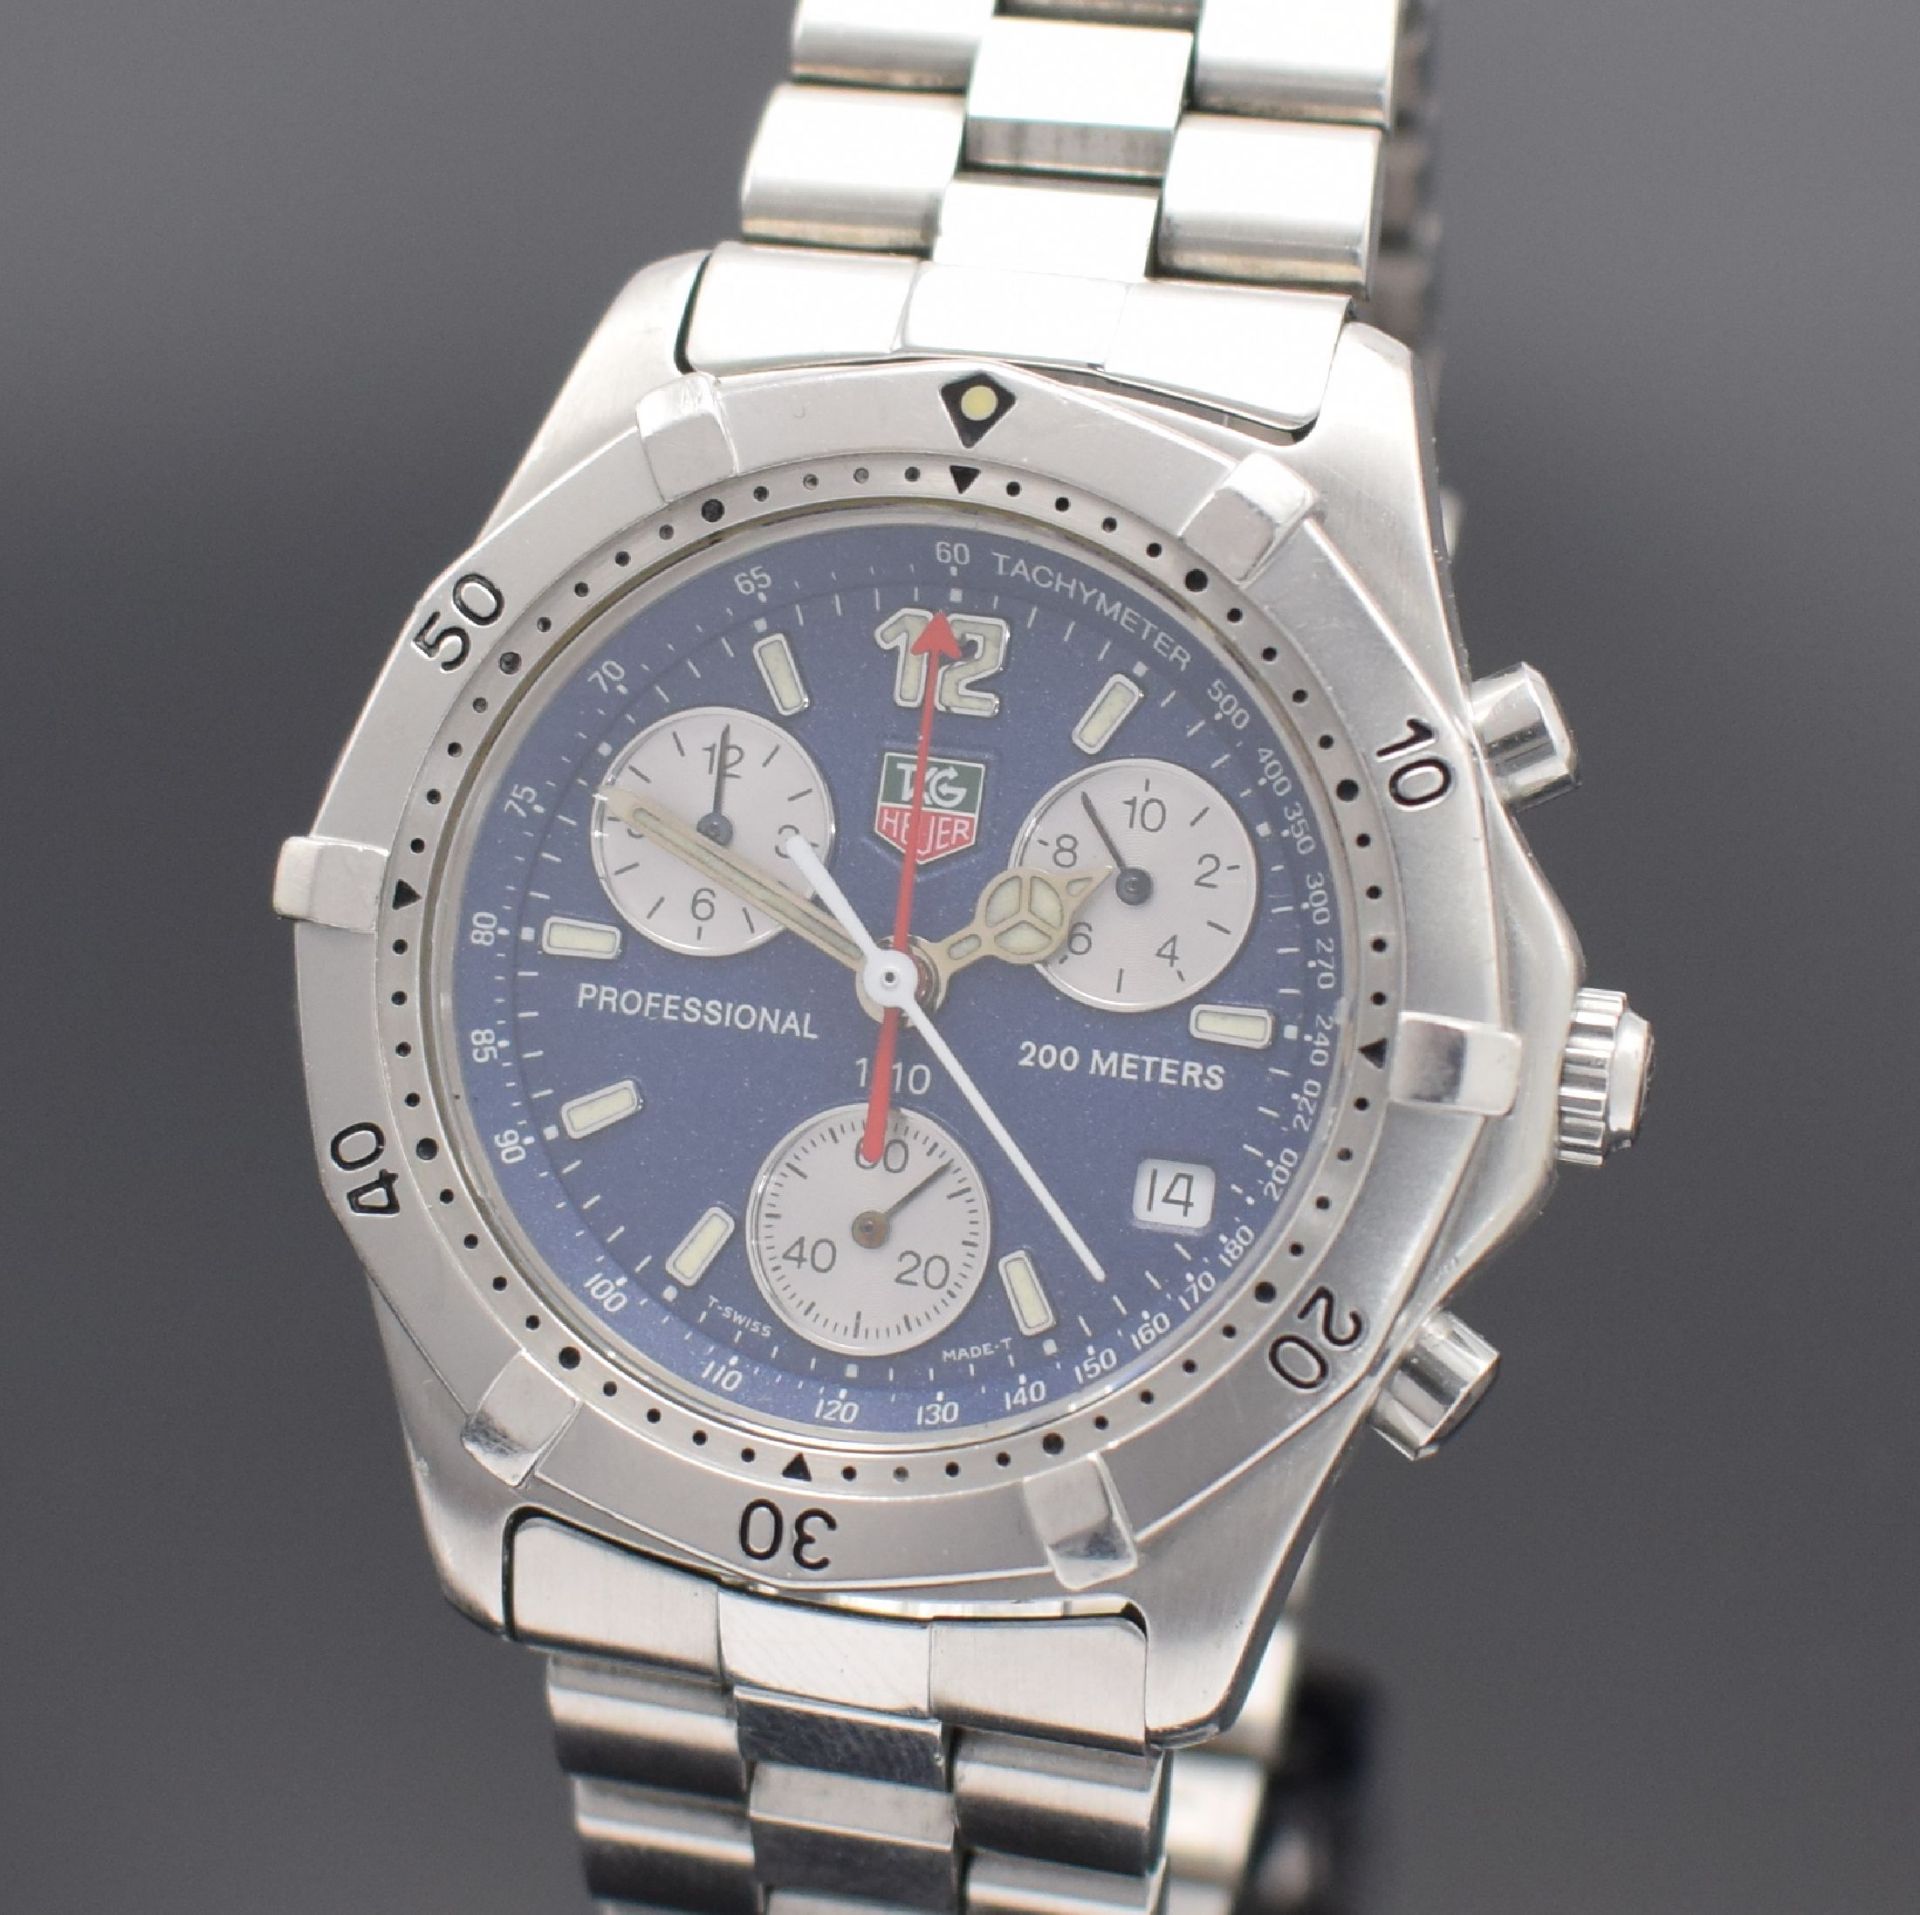 TAG HEUER Professional Armbandchronograph in Stahl - Image 2 of 5